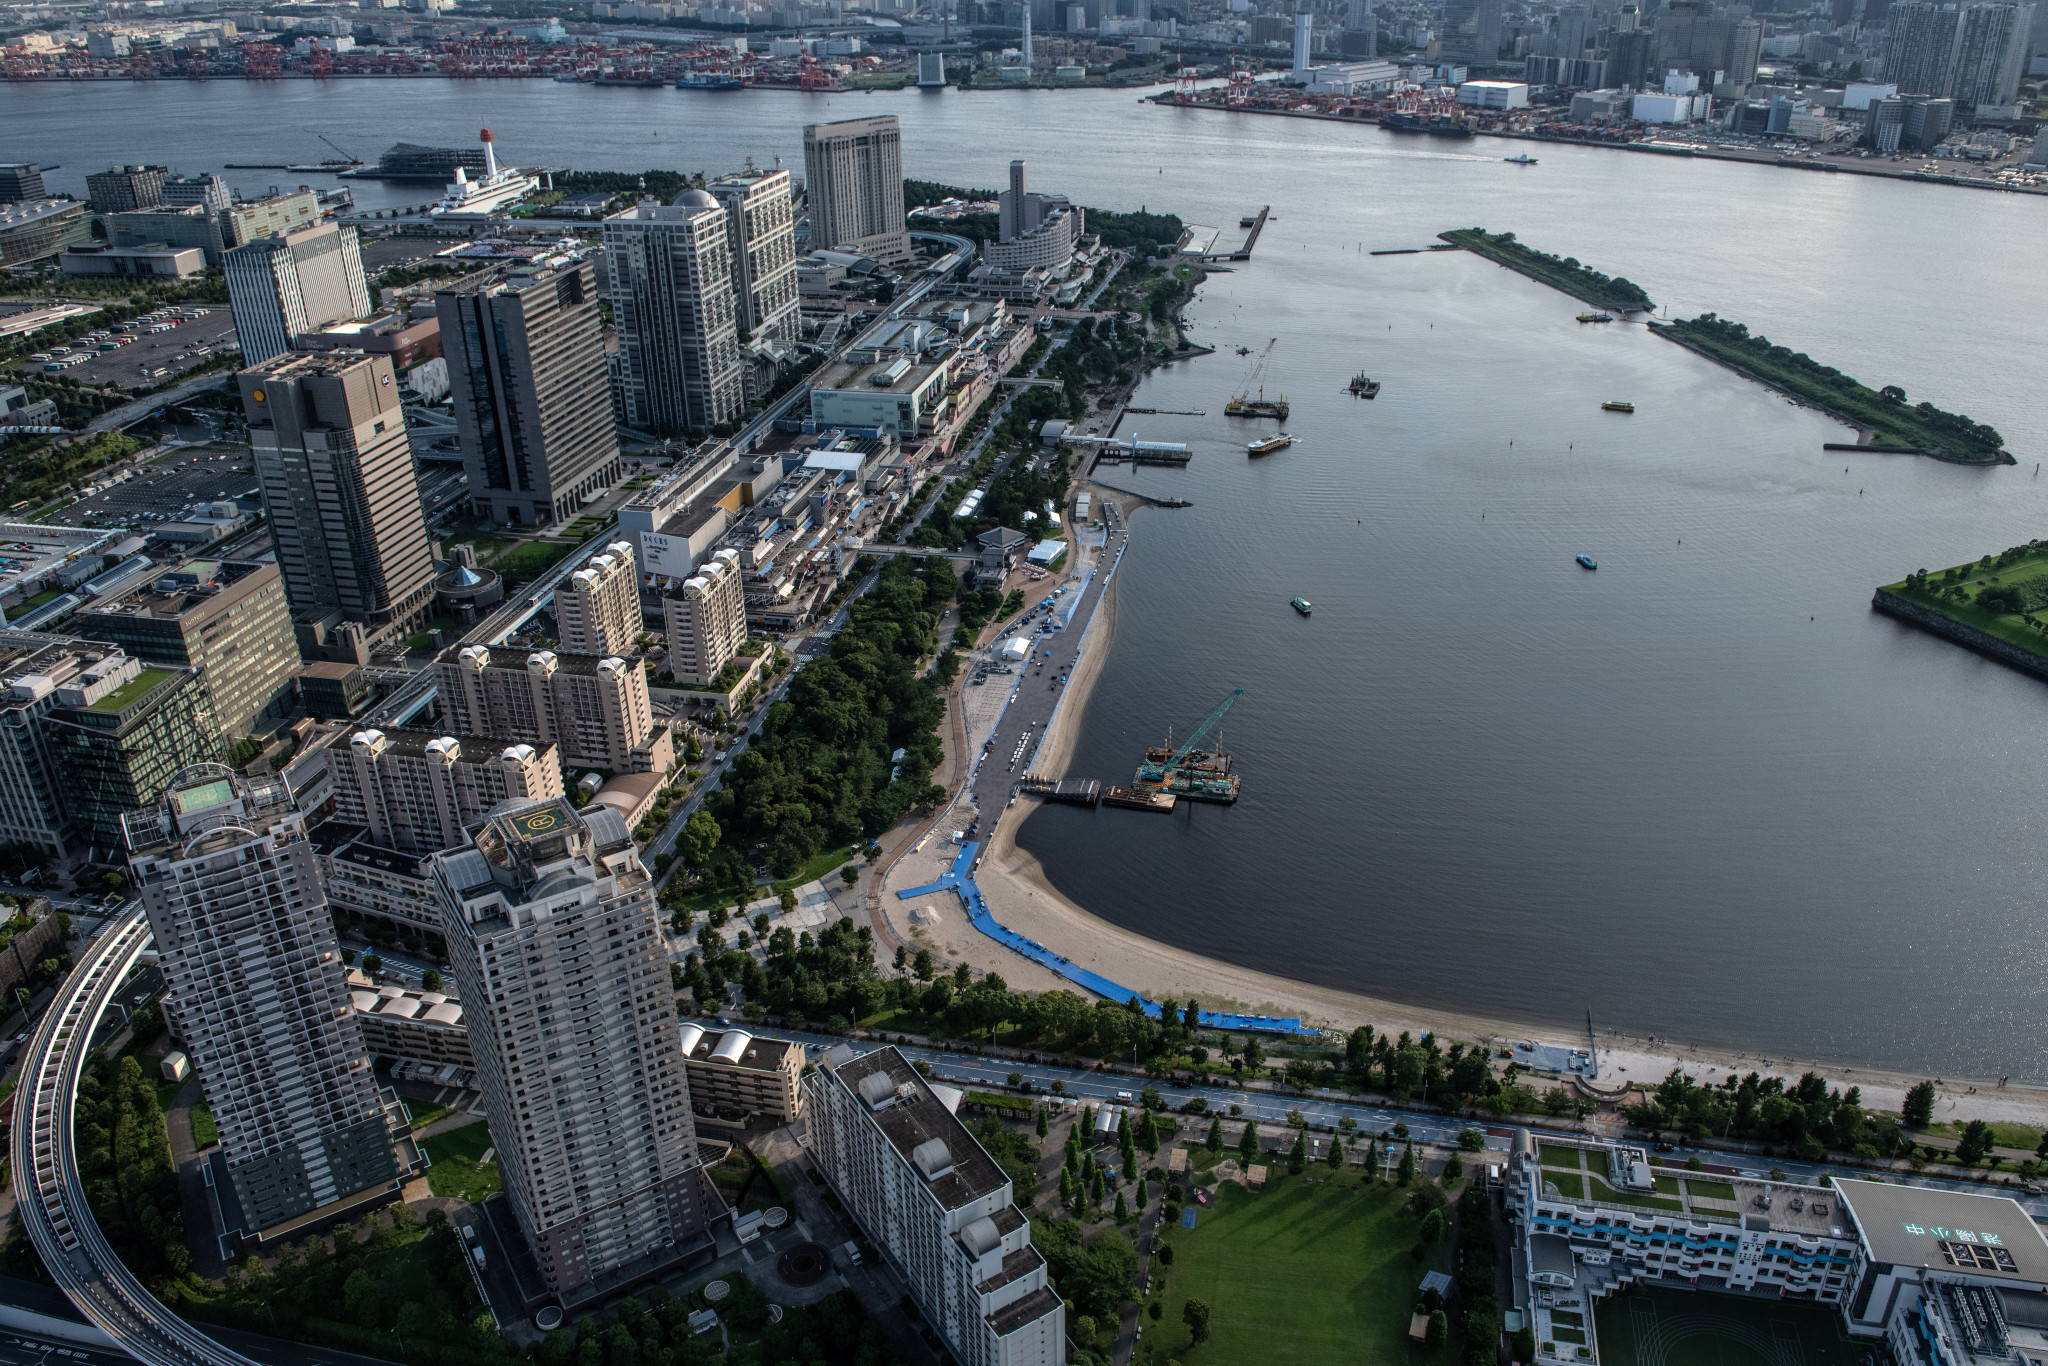 Water quality main concern as Tokyo 2020 prepare to host open water swimming test event